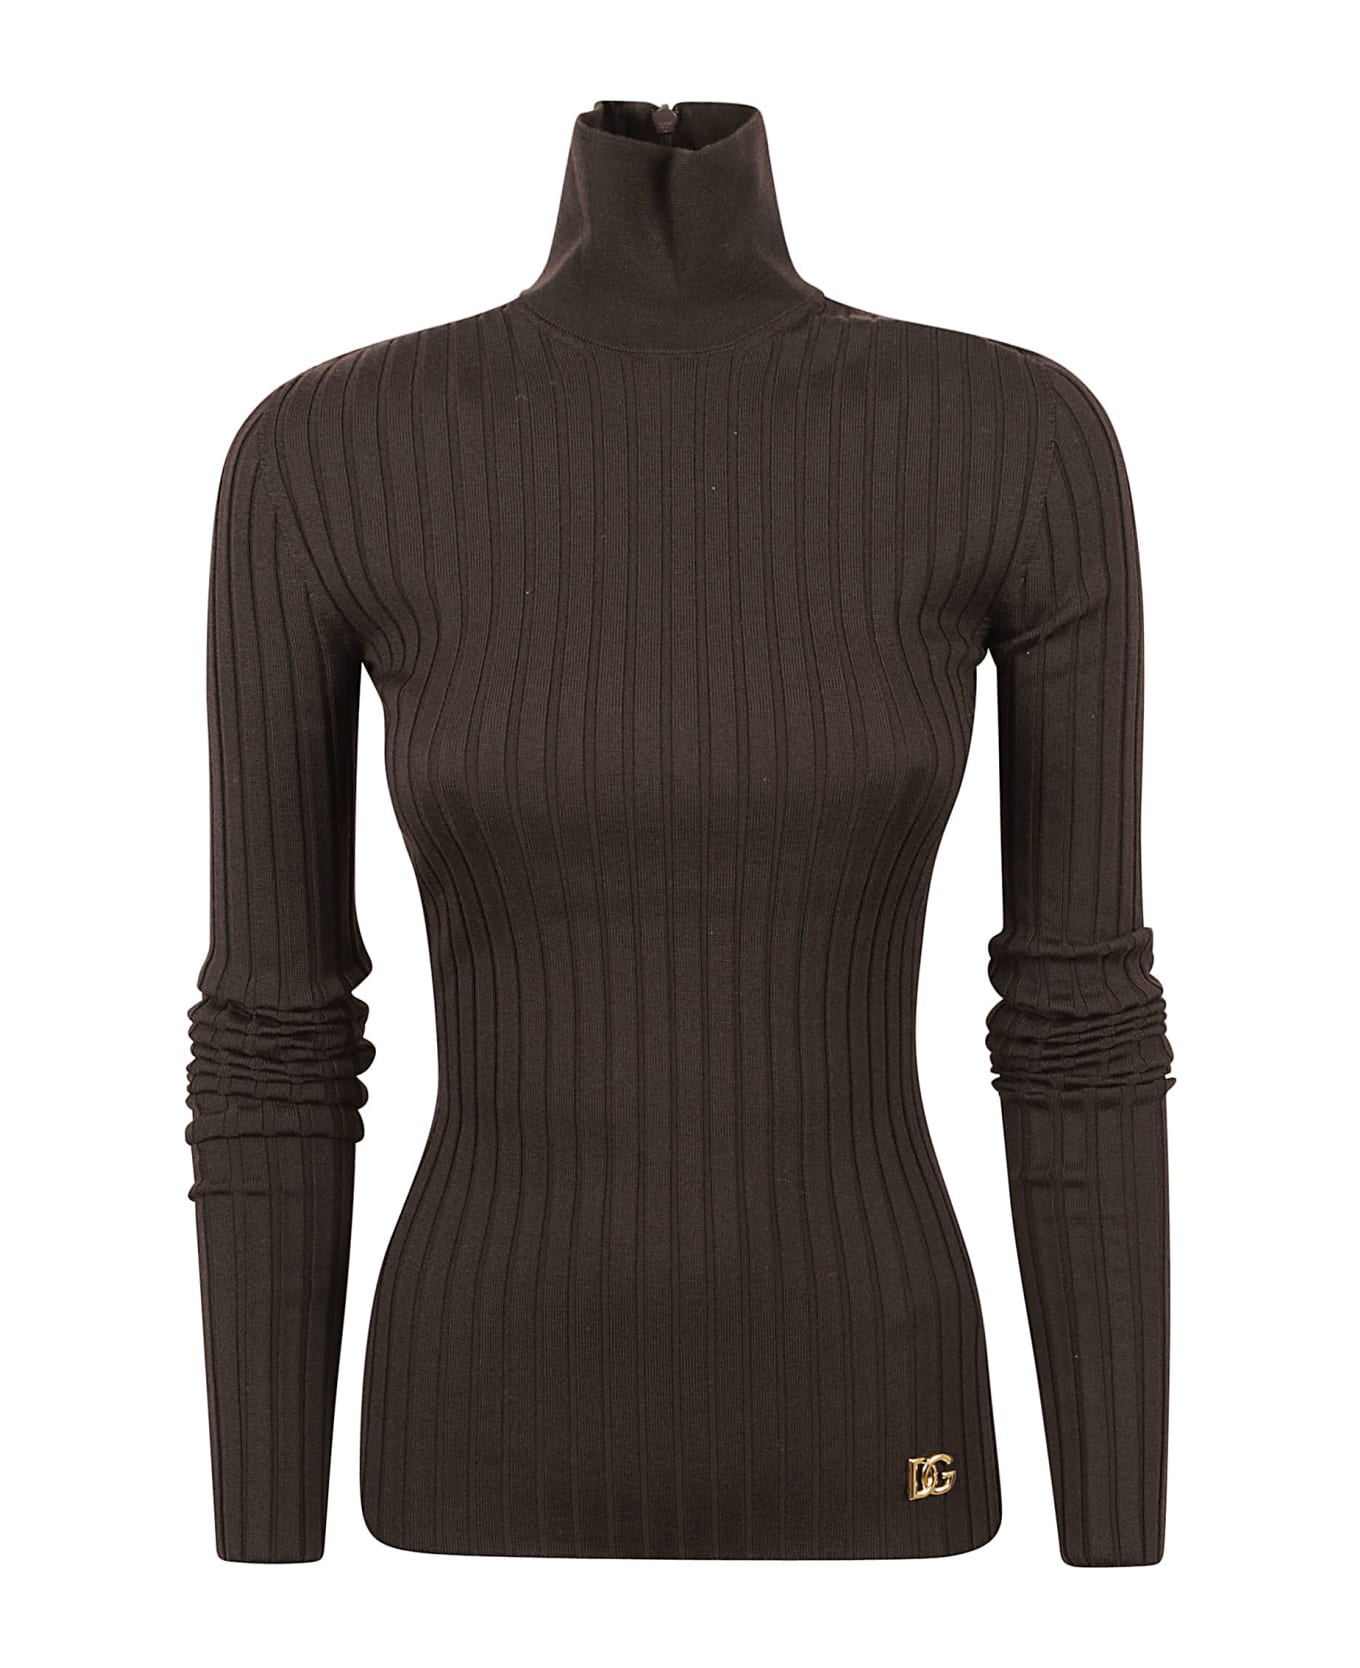 Dolce & Gabbana Ribbed Fitted Jumper - Ebano